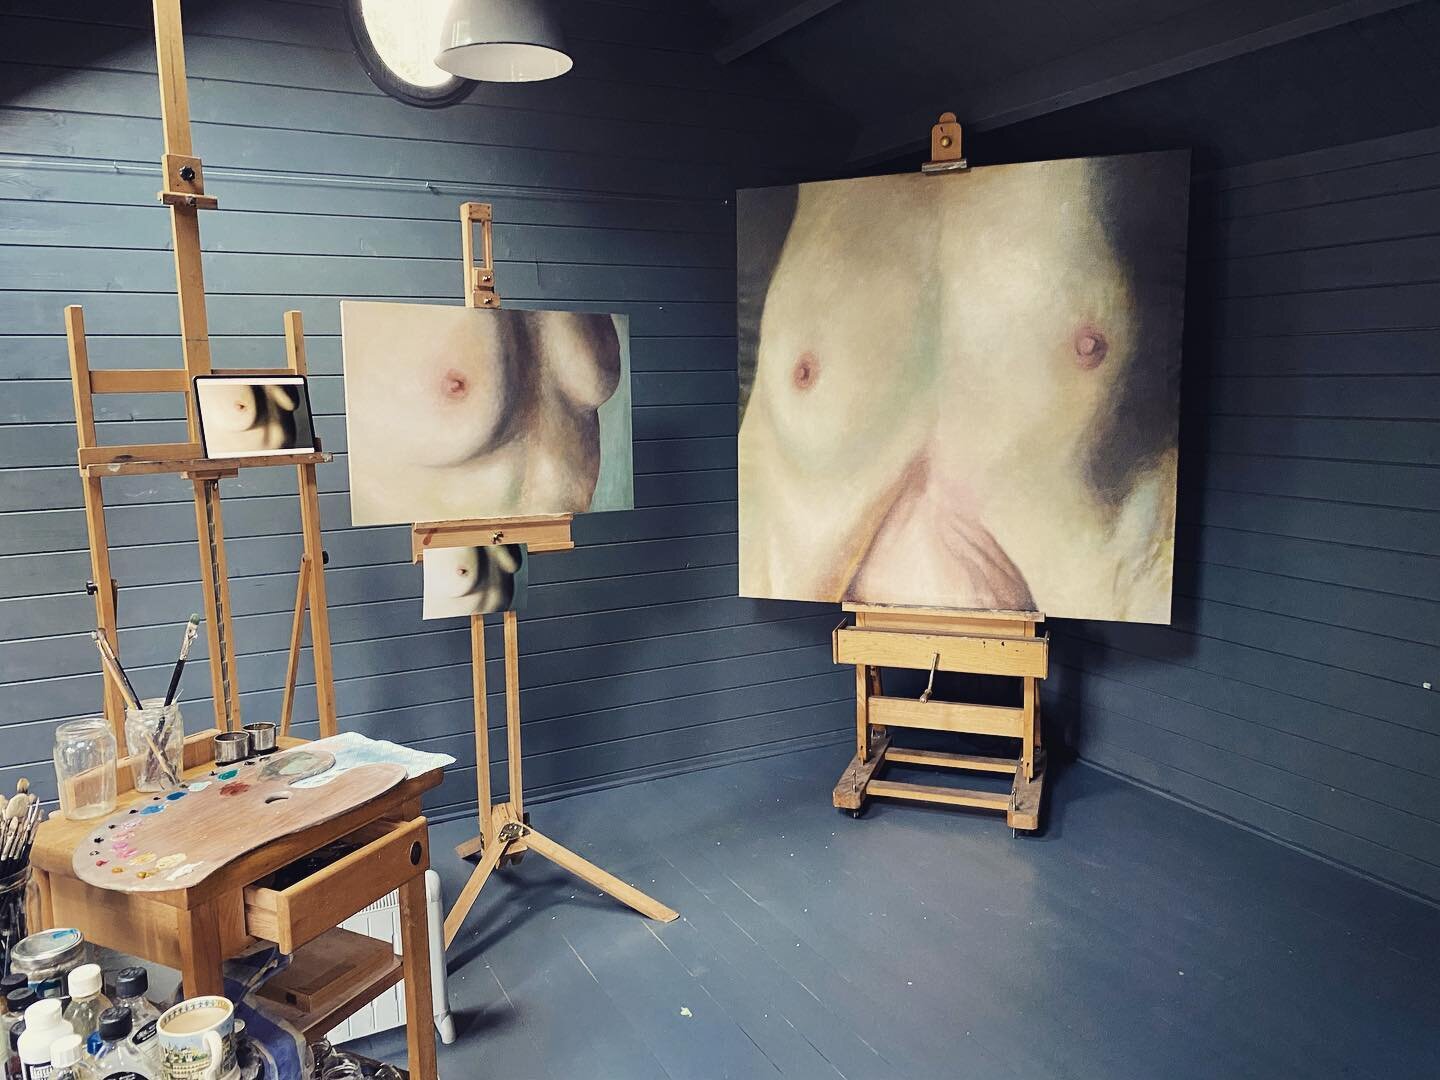 More work in progress - continuation of flesh colour studies, this time working on a larger scale. I always find it liberating to work on a big canvas. Just wish I had better heating in my studio!
#wip #oilpainting #figurativeart #figurativeartist #l